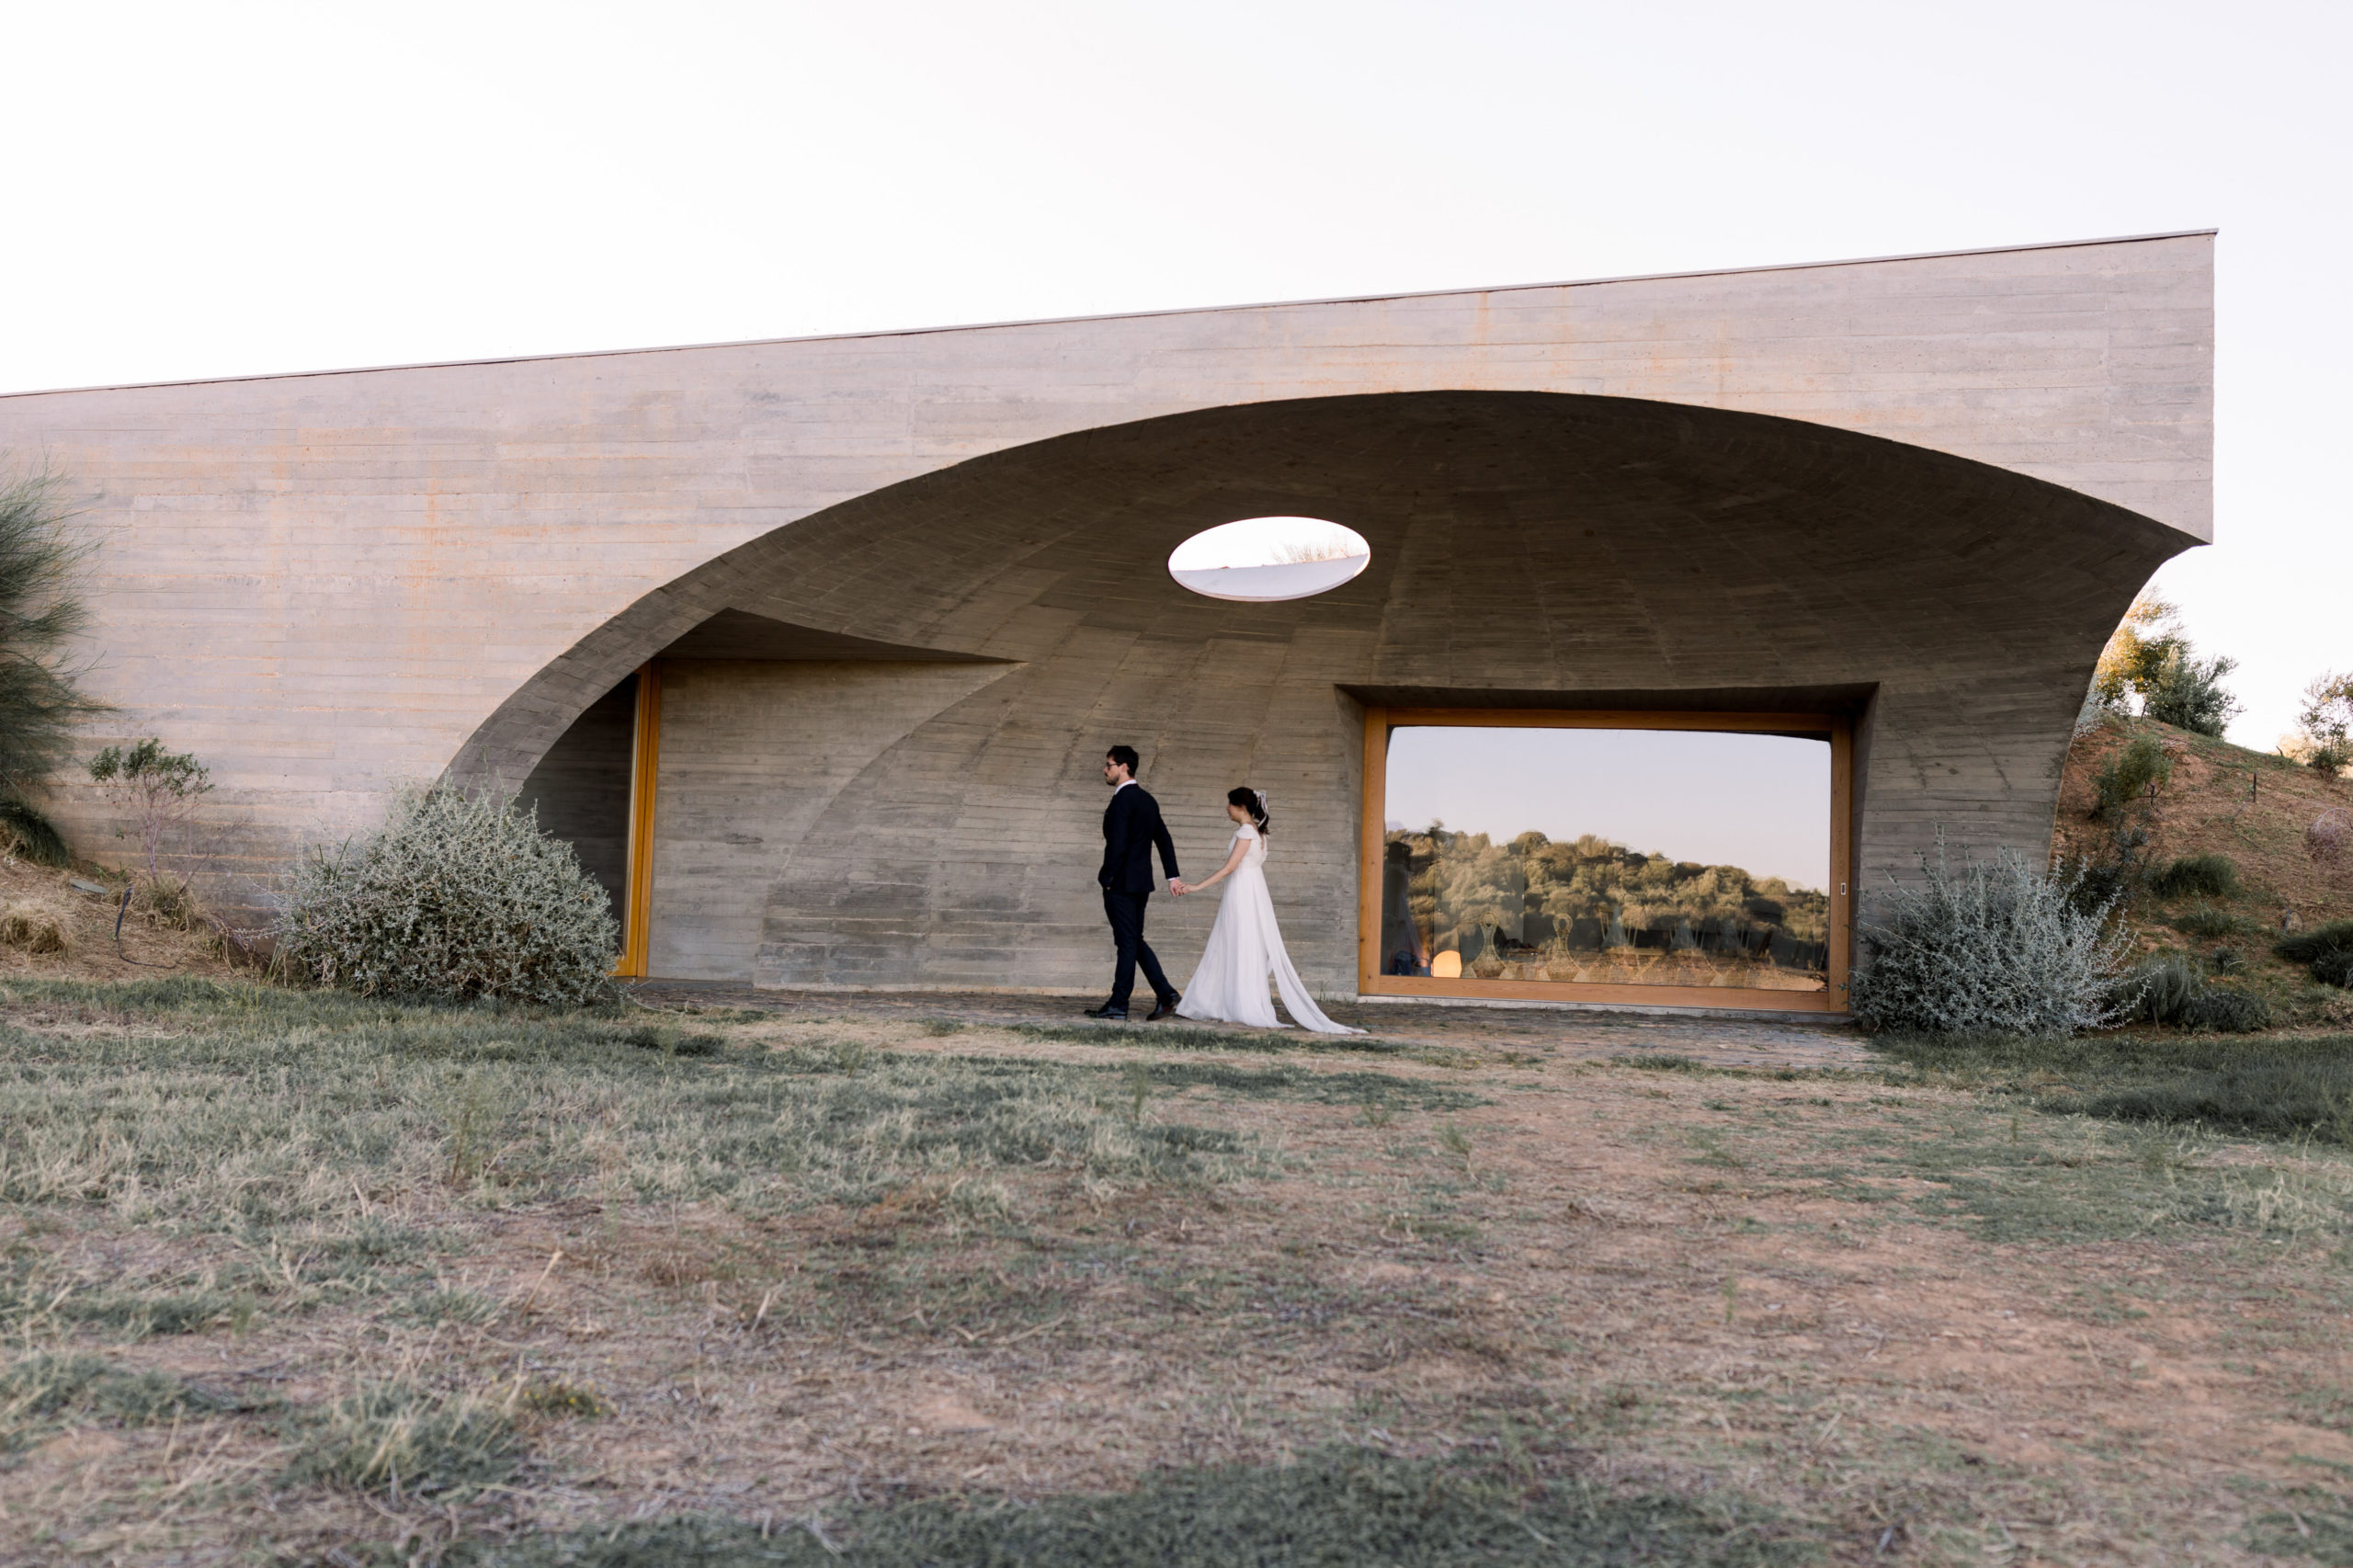 An Intimate Elopement at an Architectural Gem in Portugal - Style